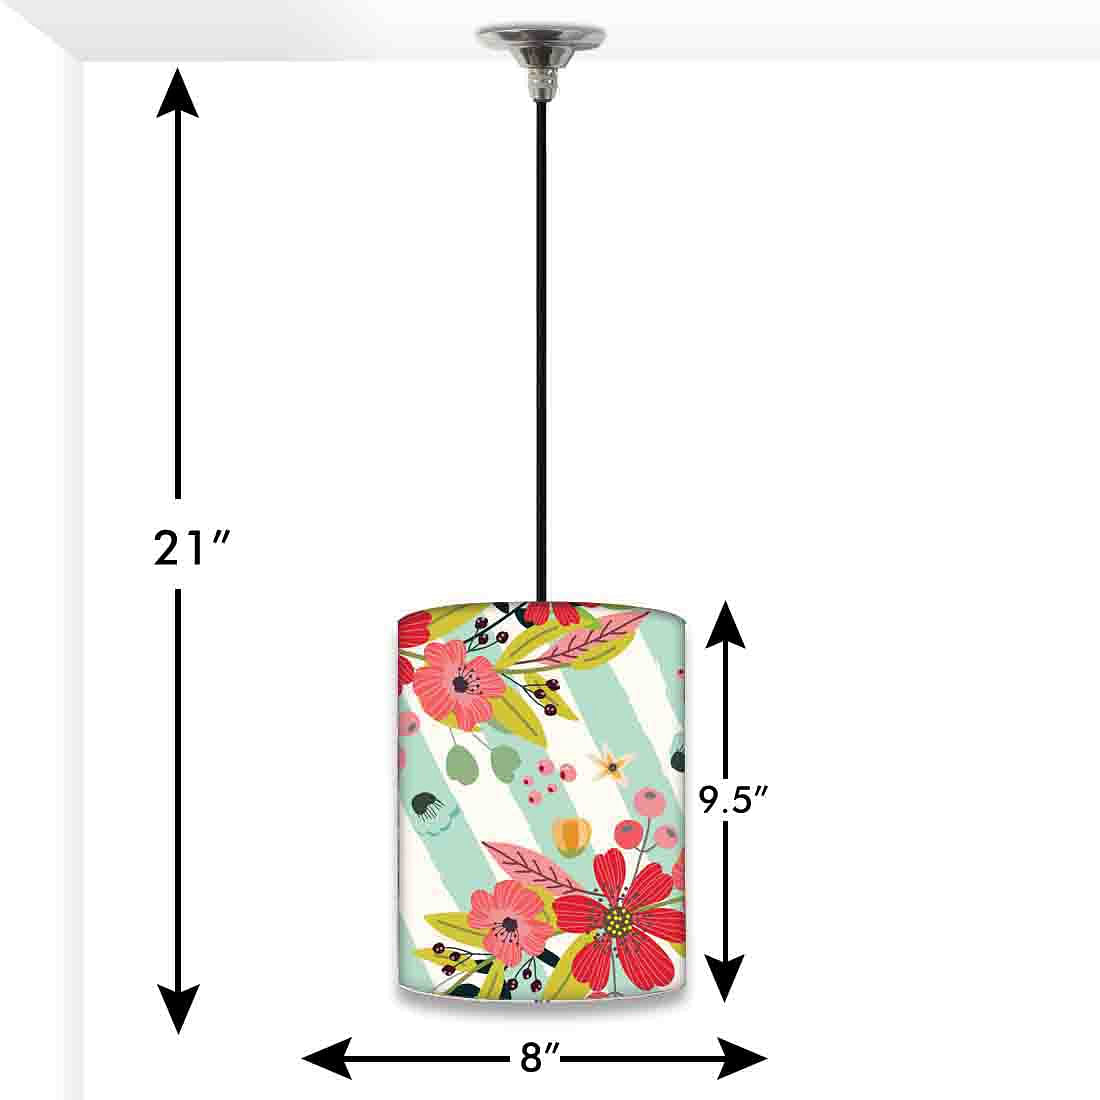 Hanging Lights for Hall Dining Room Lamps - 0075 Nutcase